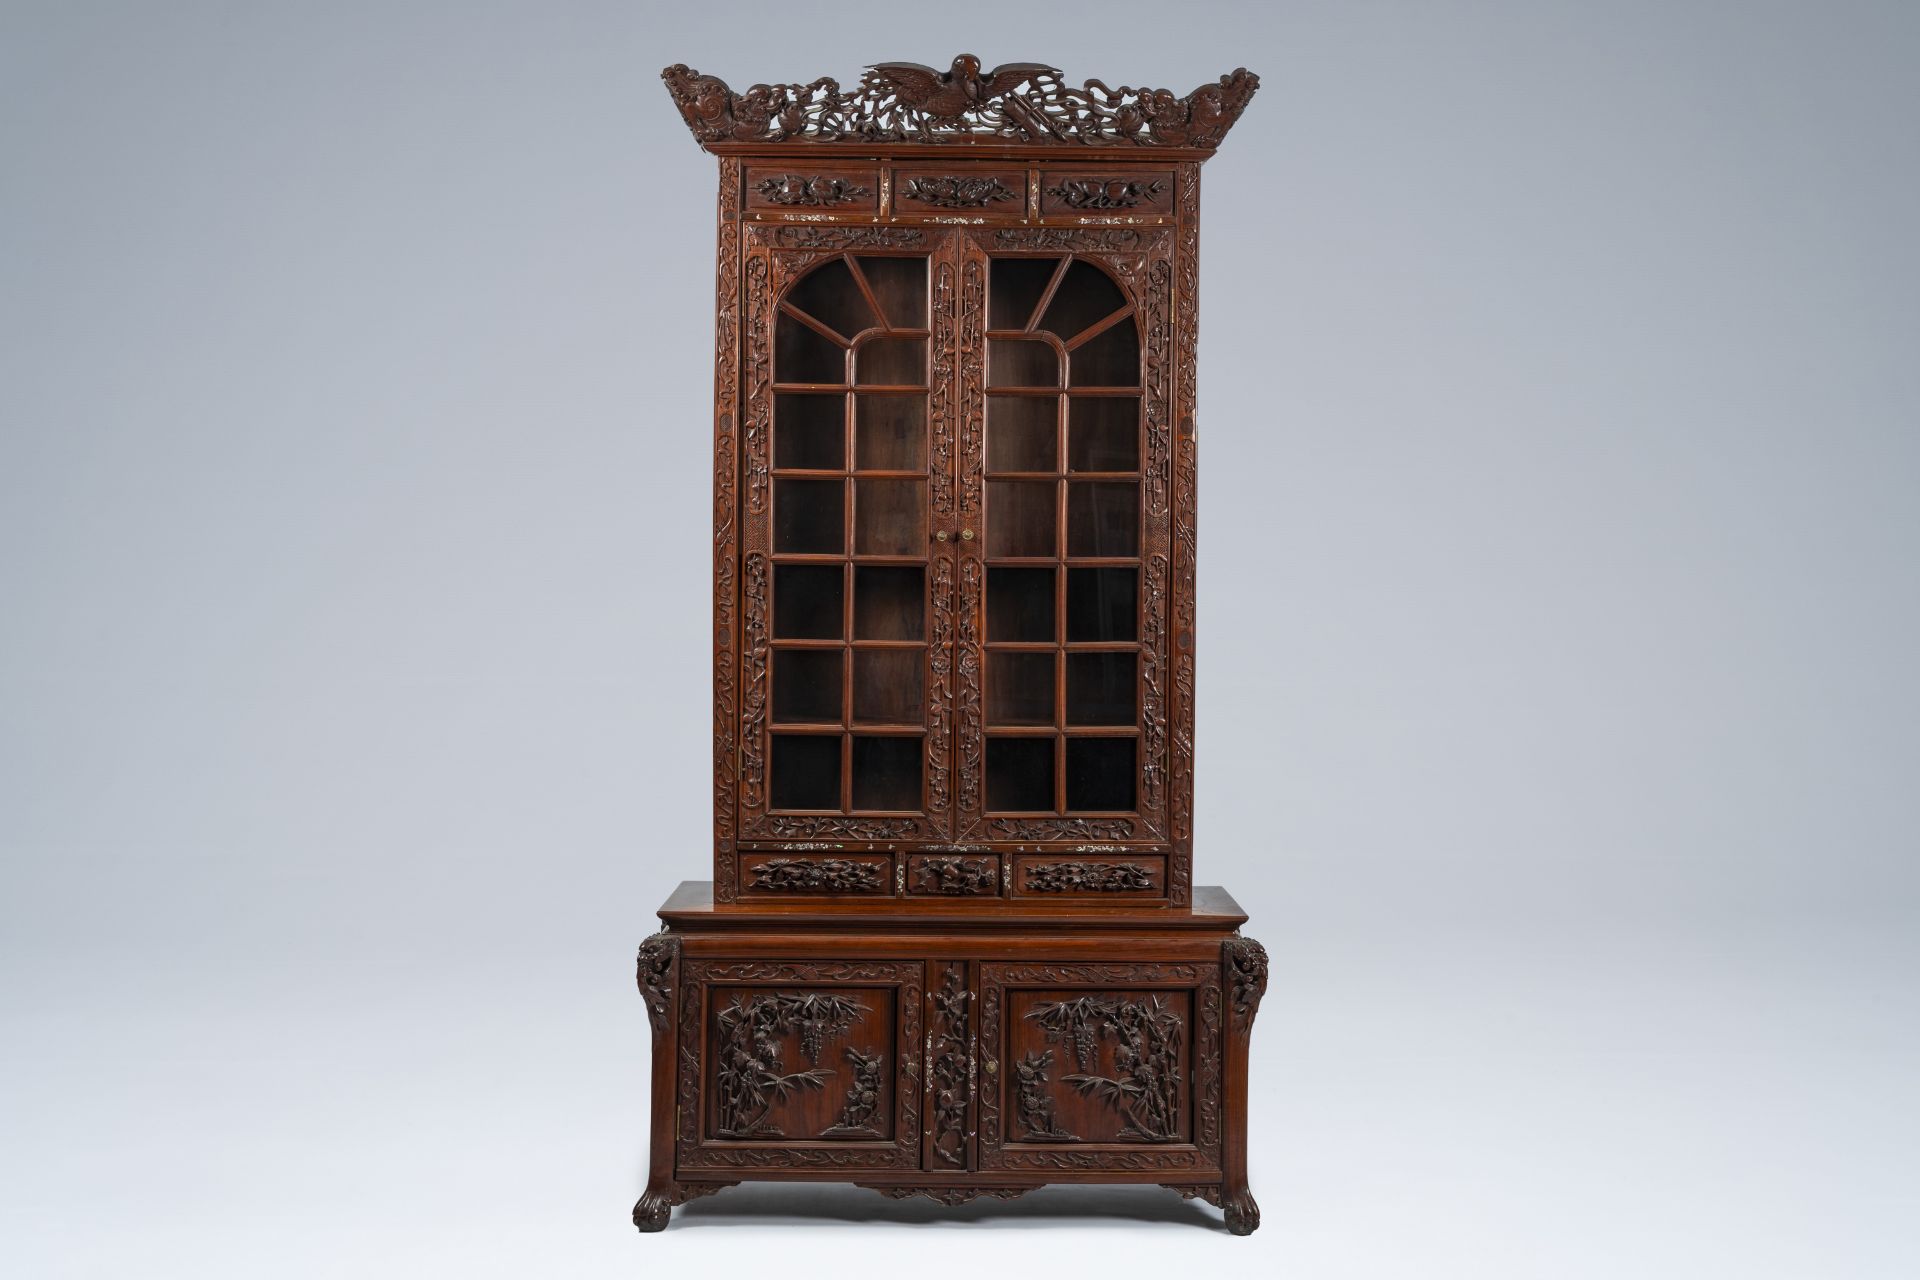 A Chinese or Vietnamese wooden four-door display cabinet with mother-of-pearl inlay, ca. 1900